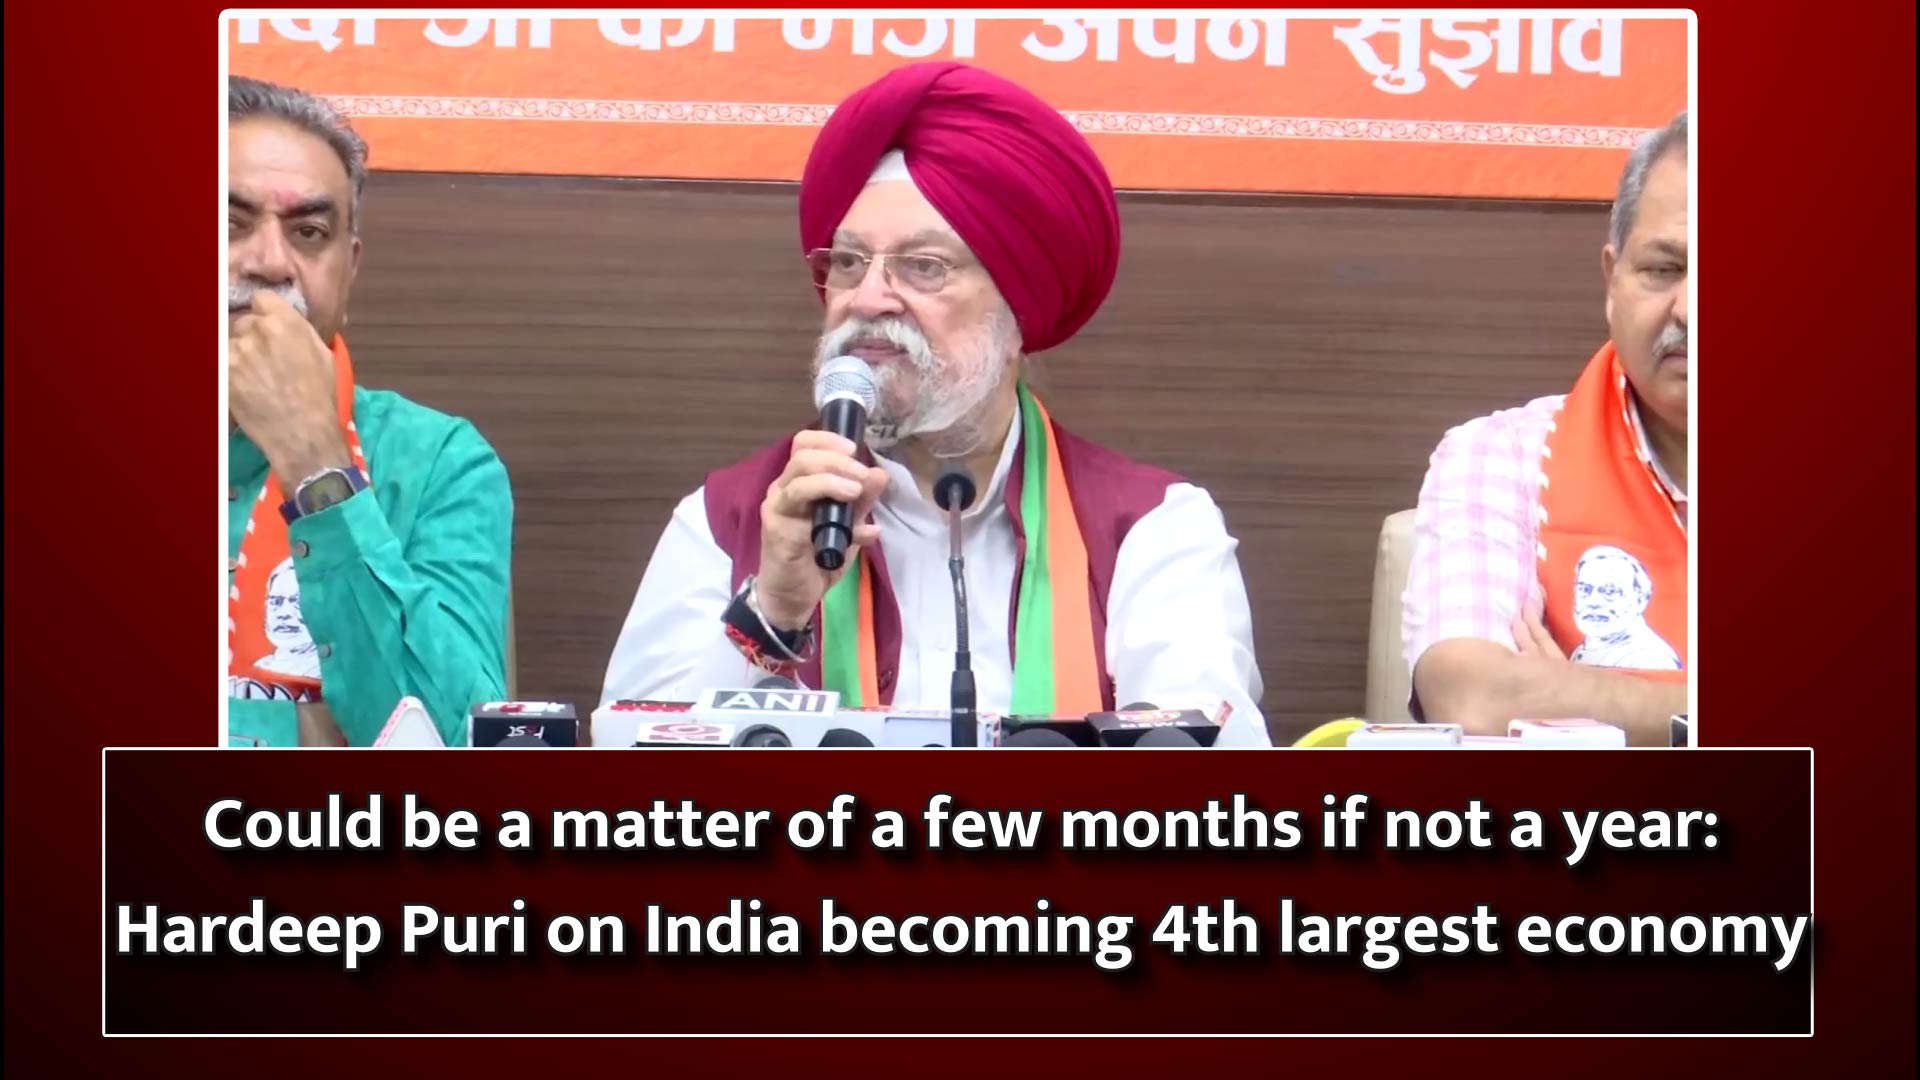 Could be a matter of a few months if not a year: Hardeep Puri on India becoming 4th largest economy